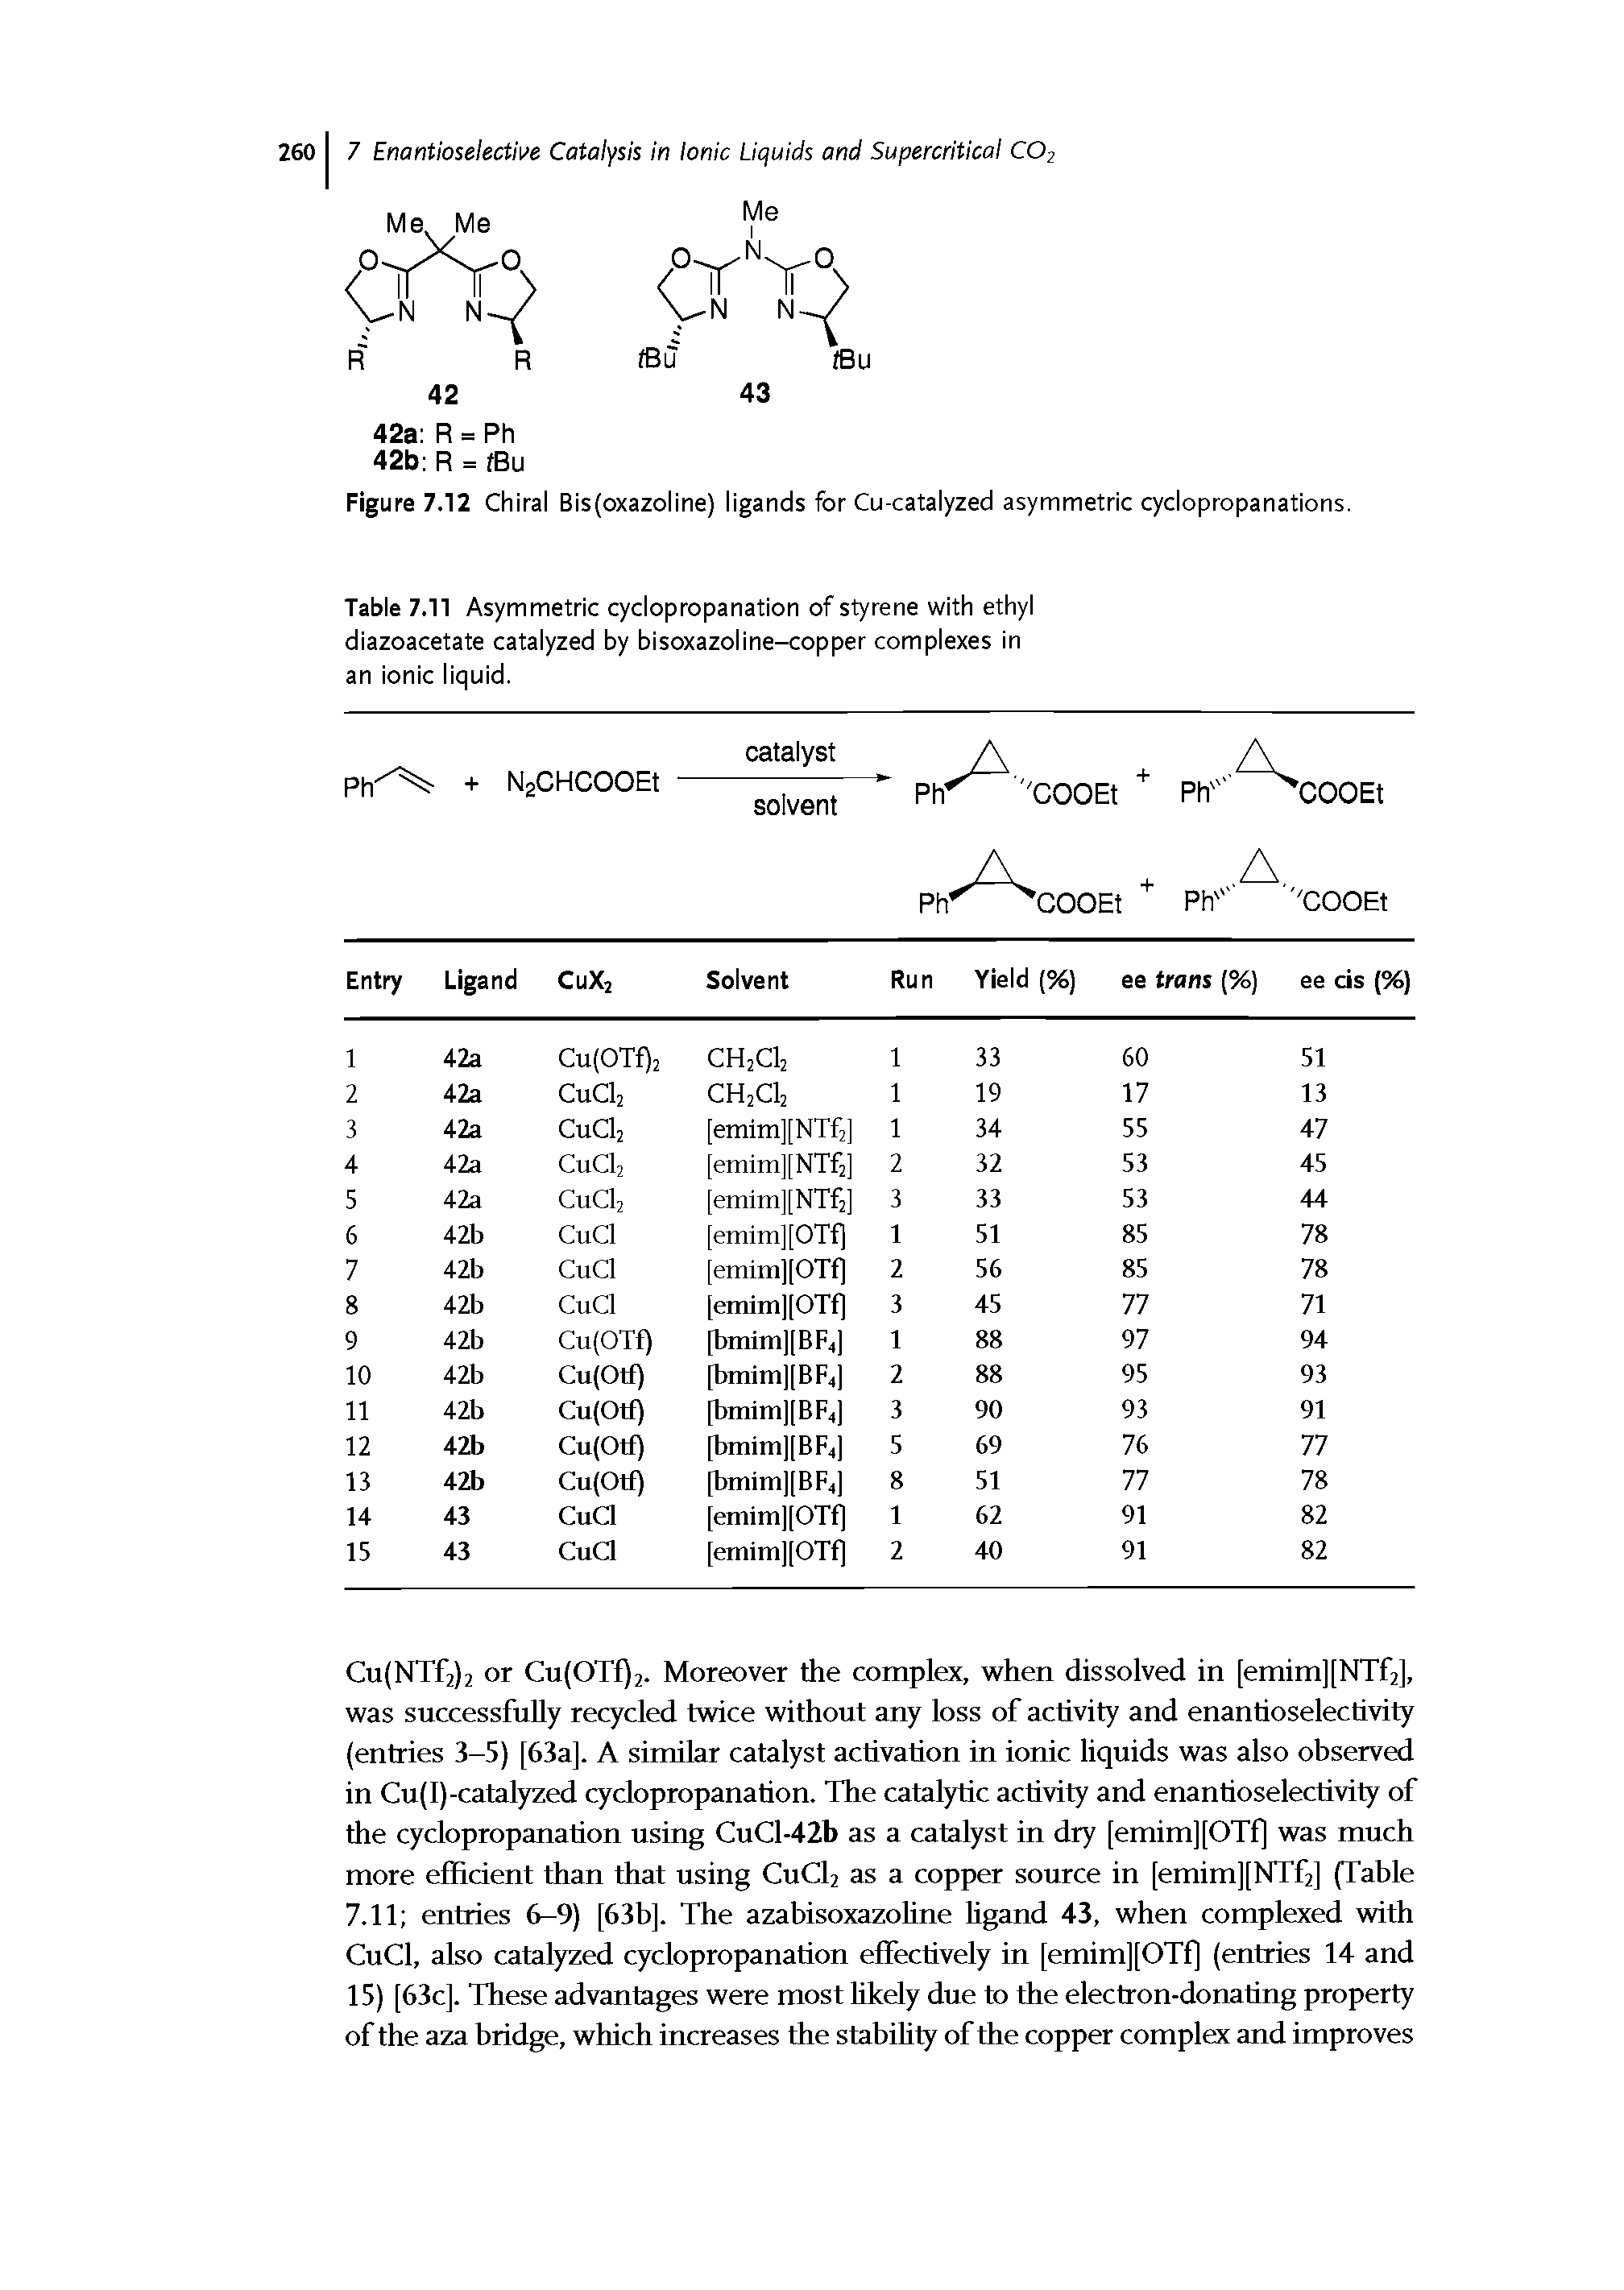 Table 7.11 Asymmetric cyclopropanation of styrene with ethyl diazoacetate catalyzed by bisoxazoline-copper complexes in an ionic liquid.